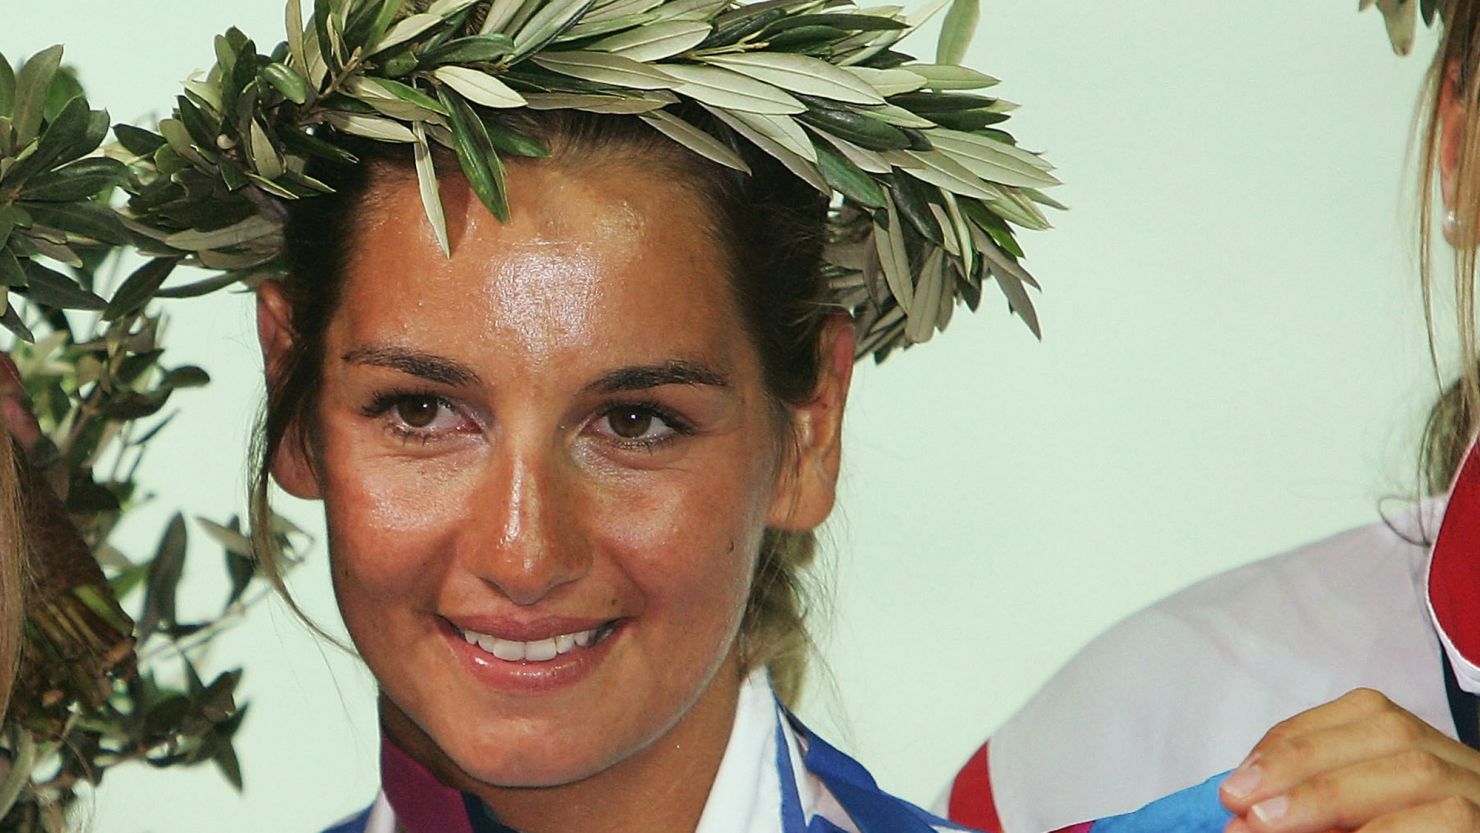 Sofia Bekatorou of Greece won gold in the women's double handed dinghy 470 finals race at the Athens 2004 Summer Olympic Games.